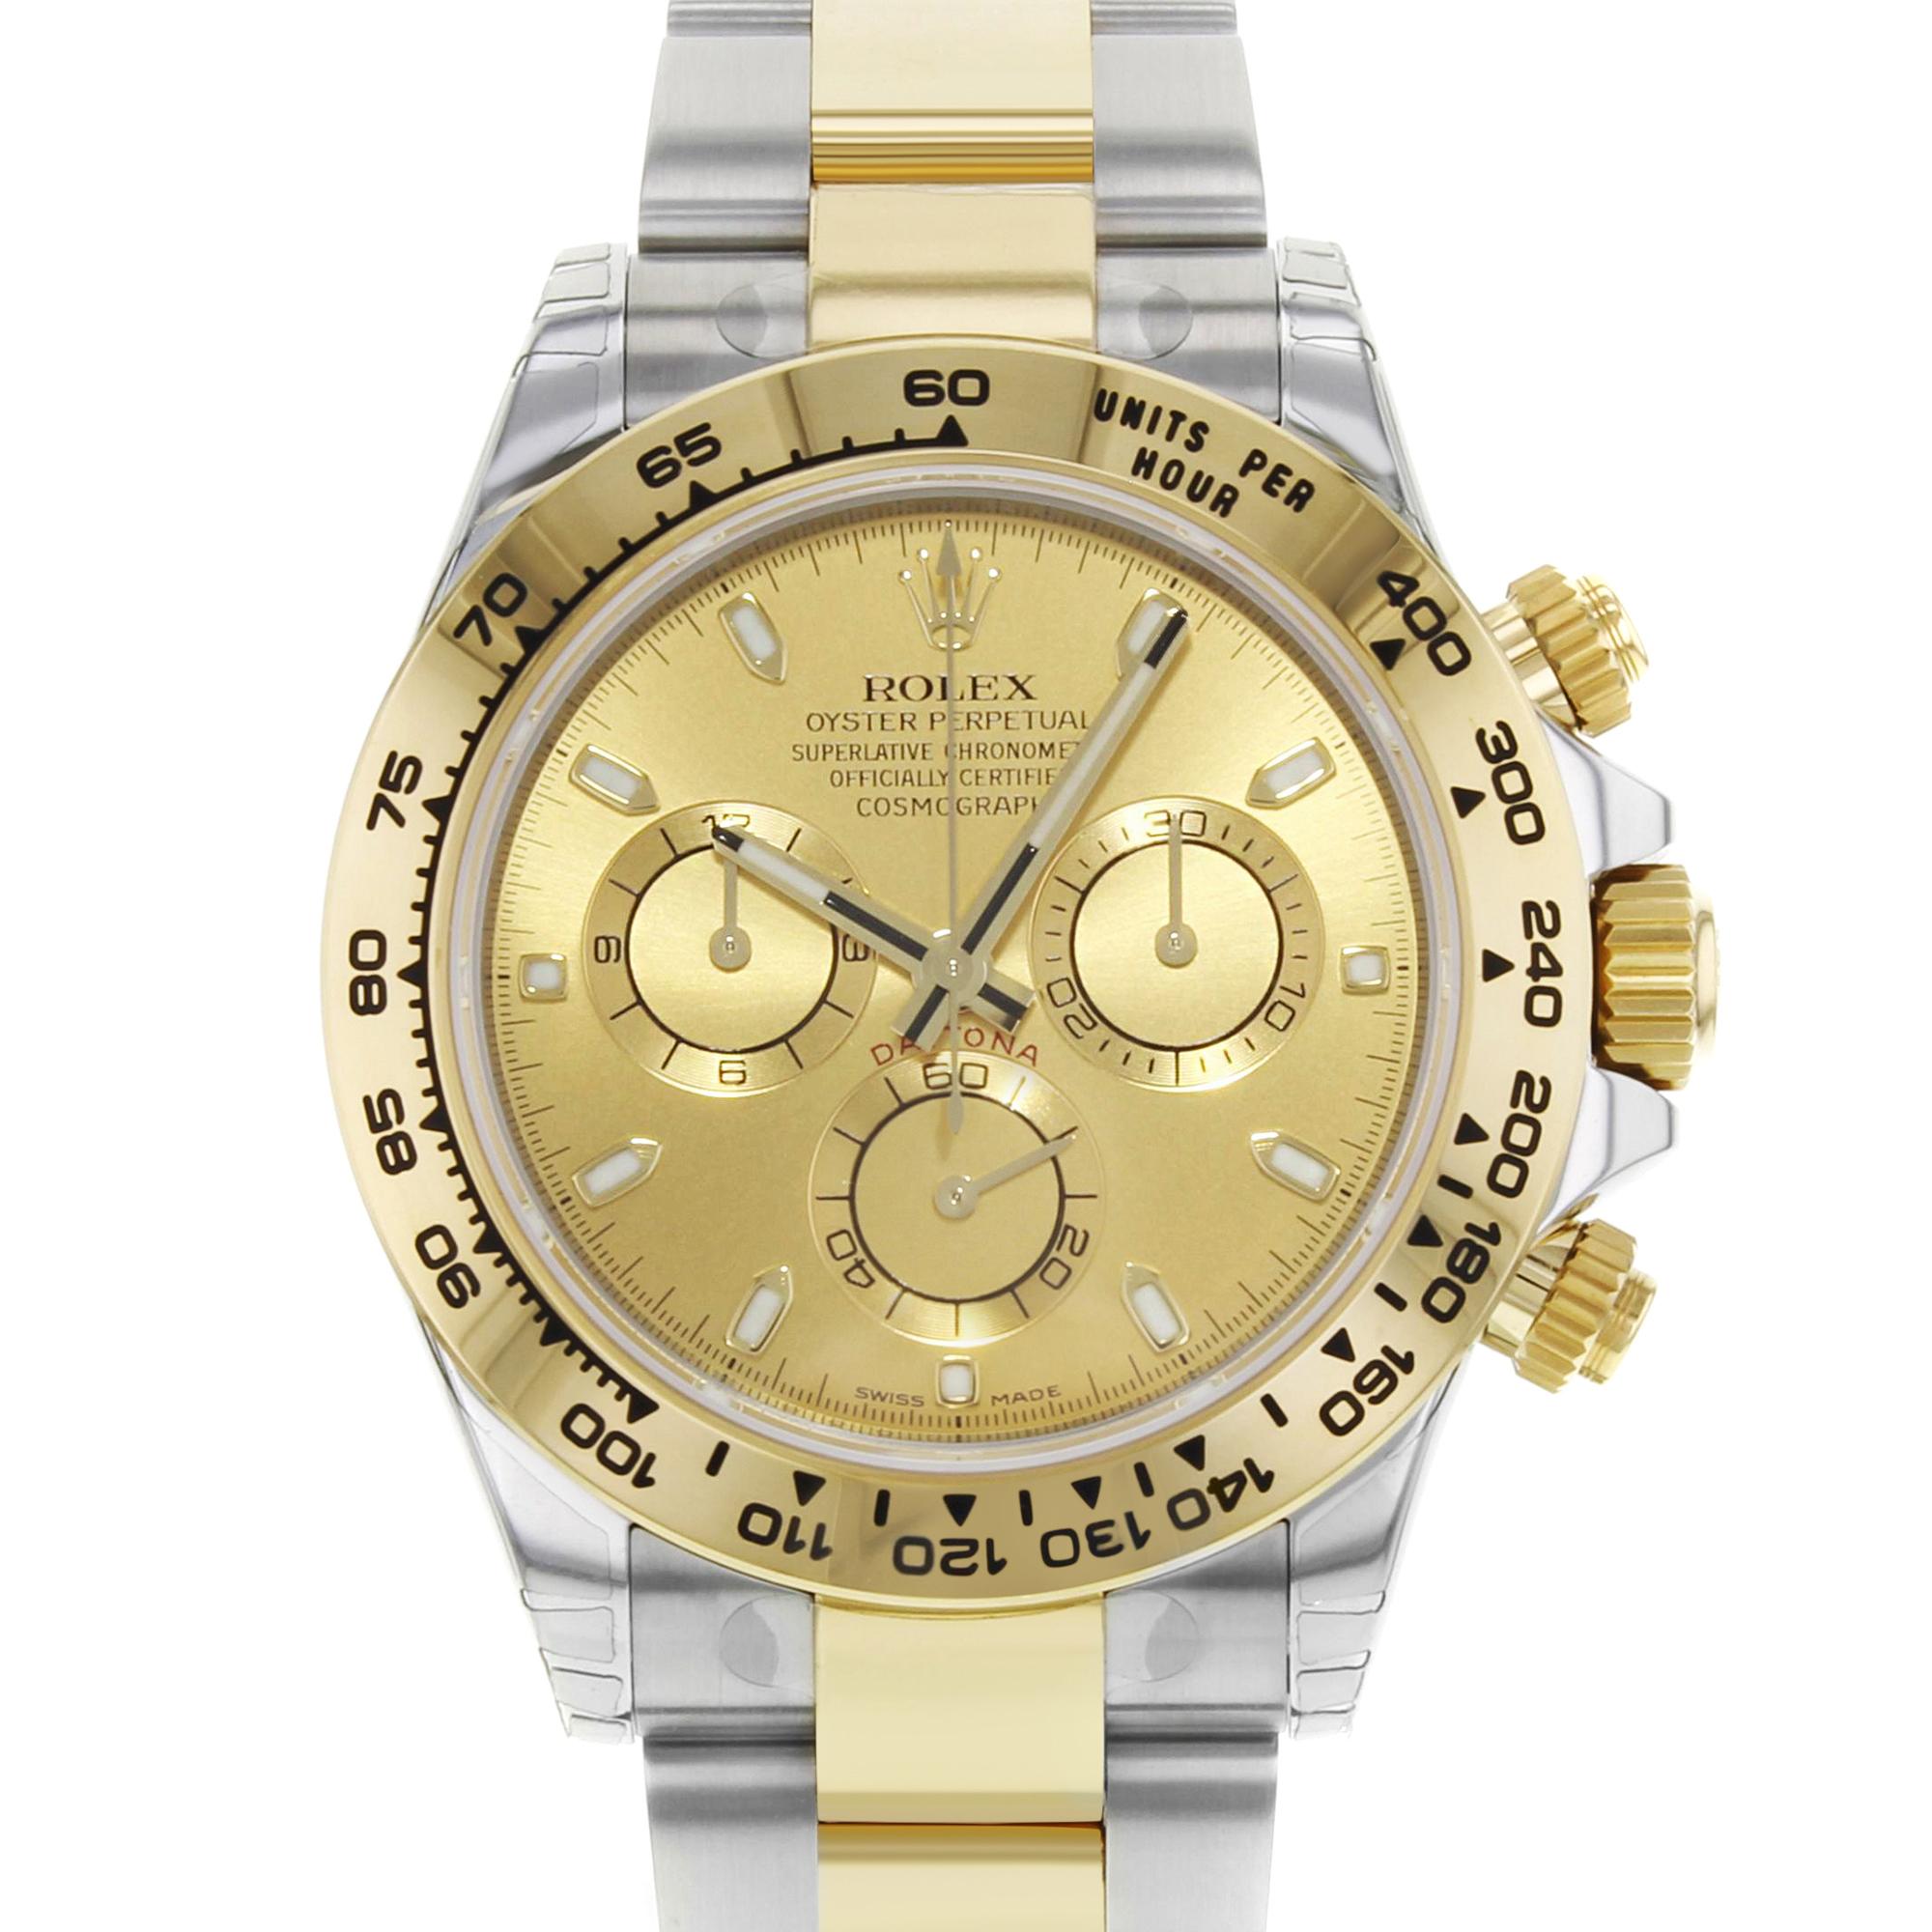 Rolex Daytona 116503 Champagne Dial Steel 18K Yellow Gold Automatic Mens Watch